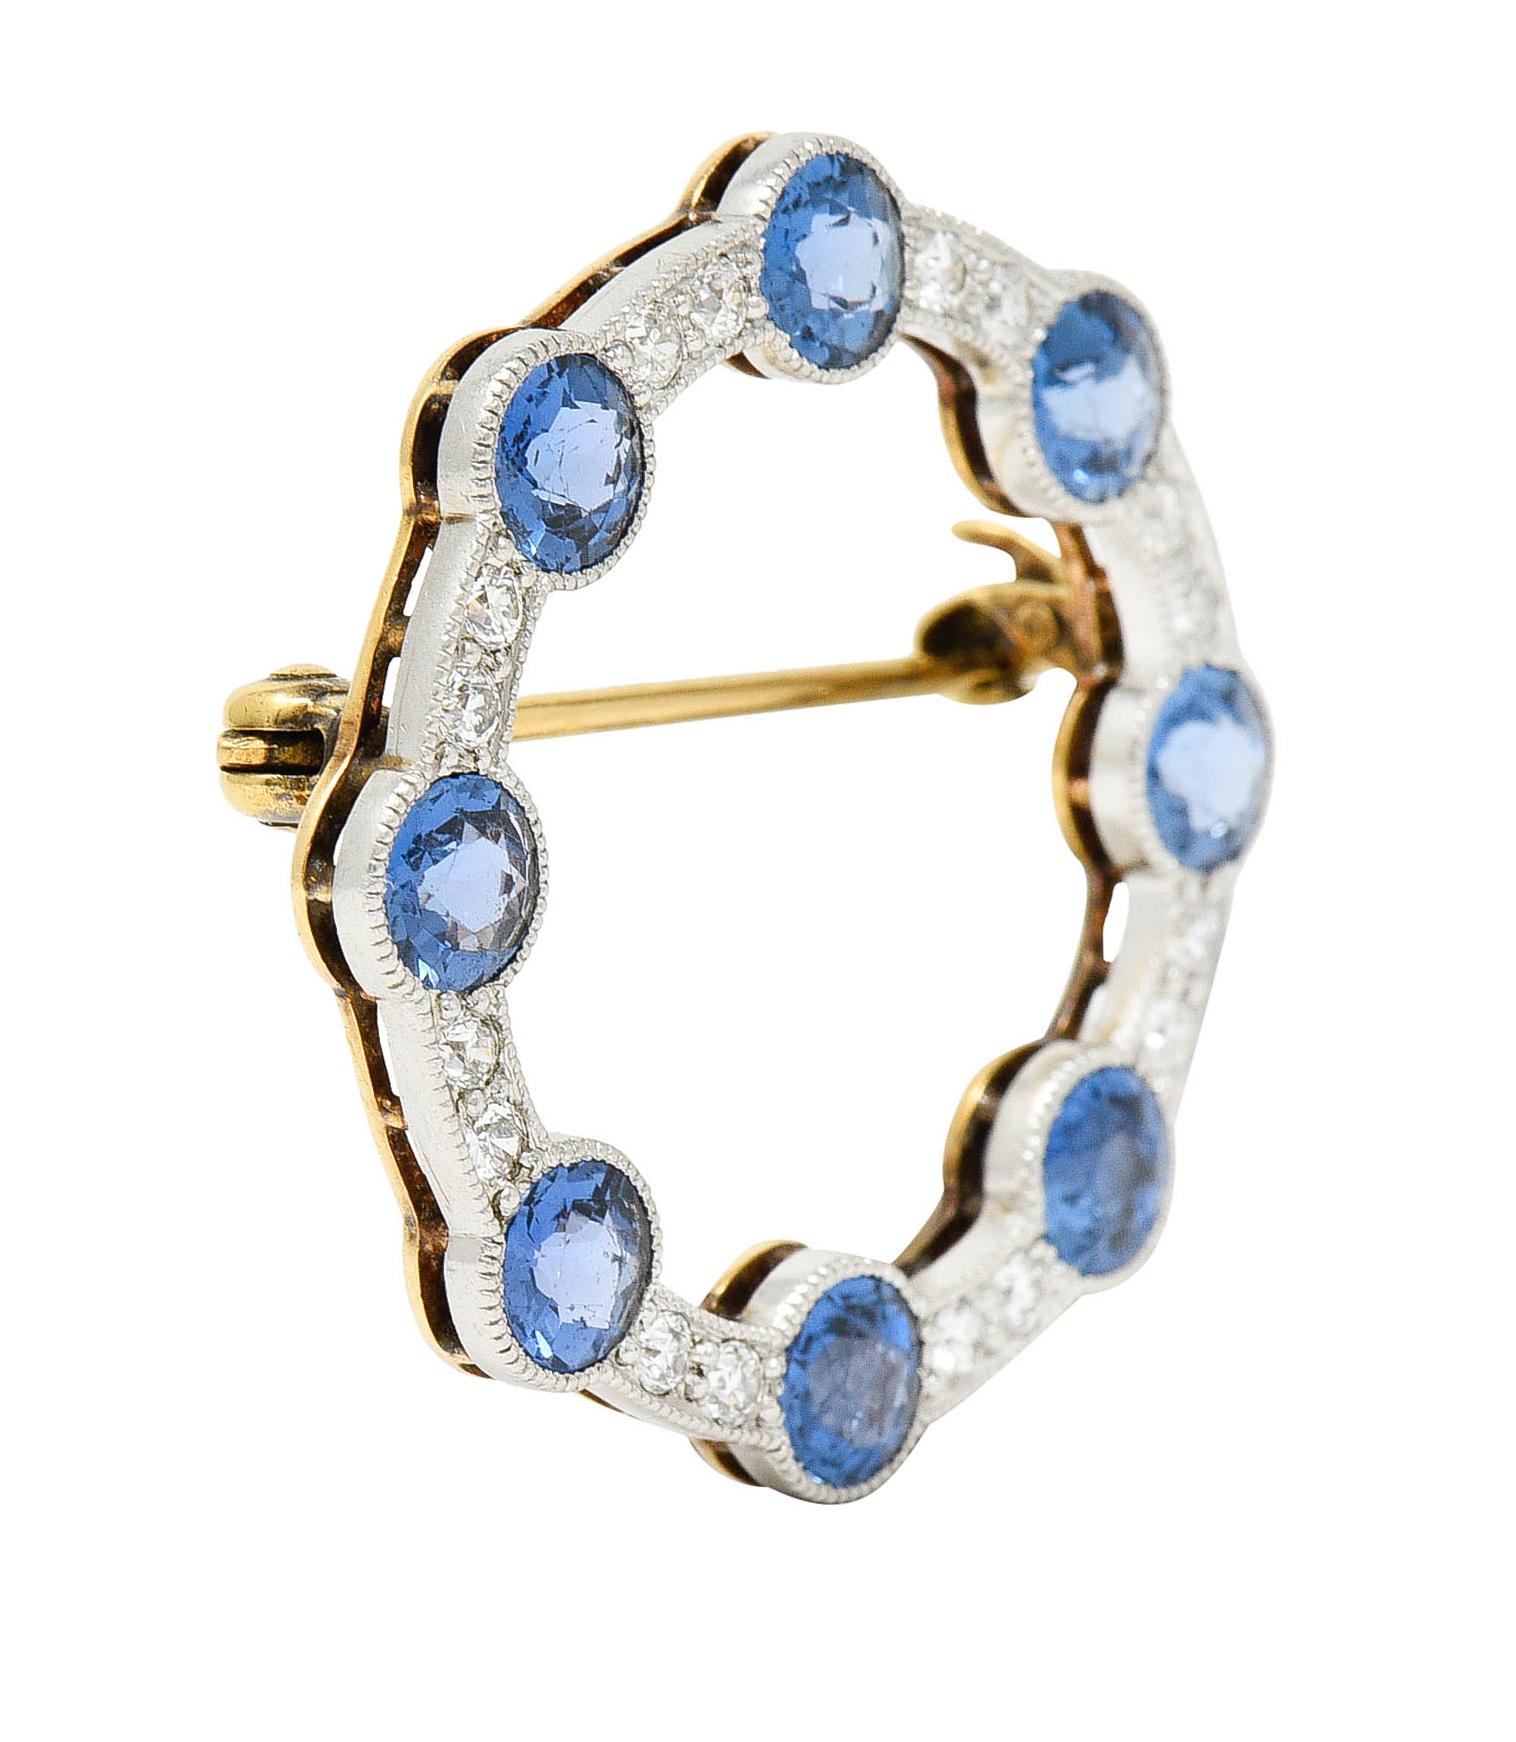 Circular brooch features eight sapphires weighing in total approximately 2.40 carats

Round cut and very well matched with violetish blue color

With transitional cut diamonds weighing in total approximately 0.35 carat - G to I color with SI